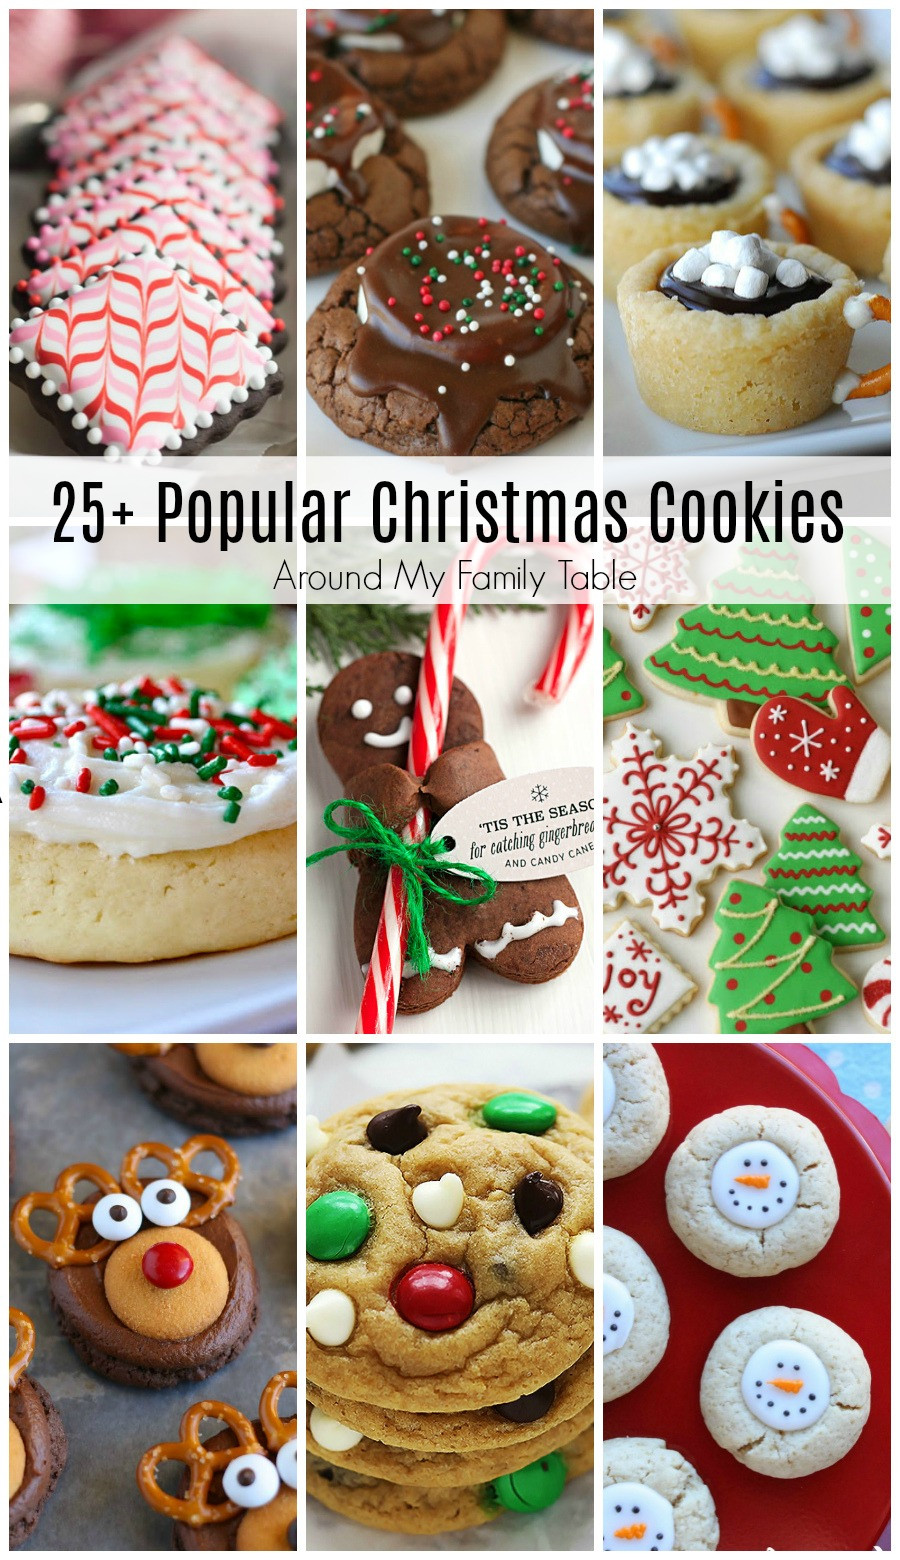 Most Popular Christmas Cookies
 Most Popular Christmas Cookie Recipes Around My Family Table